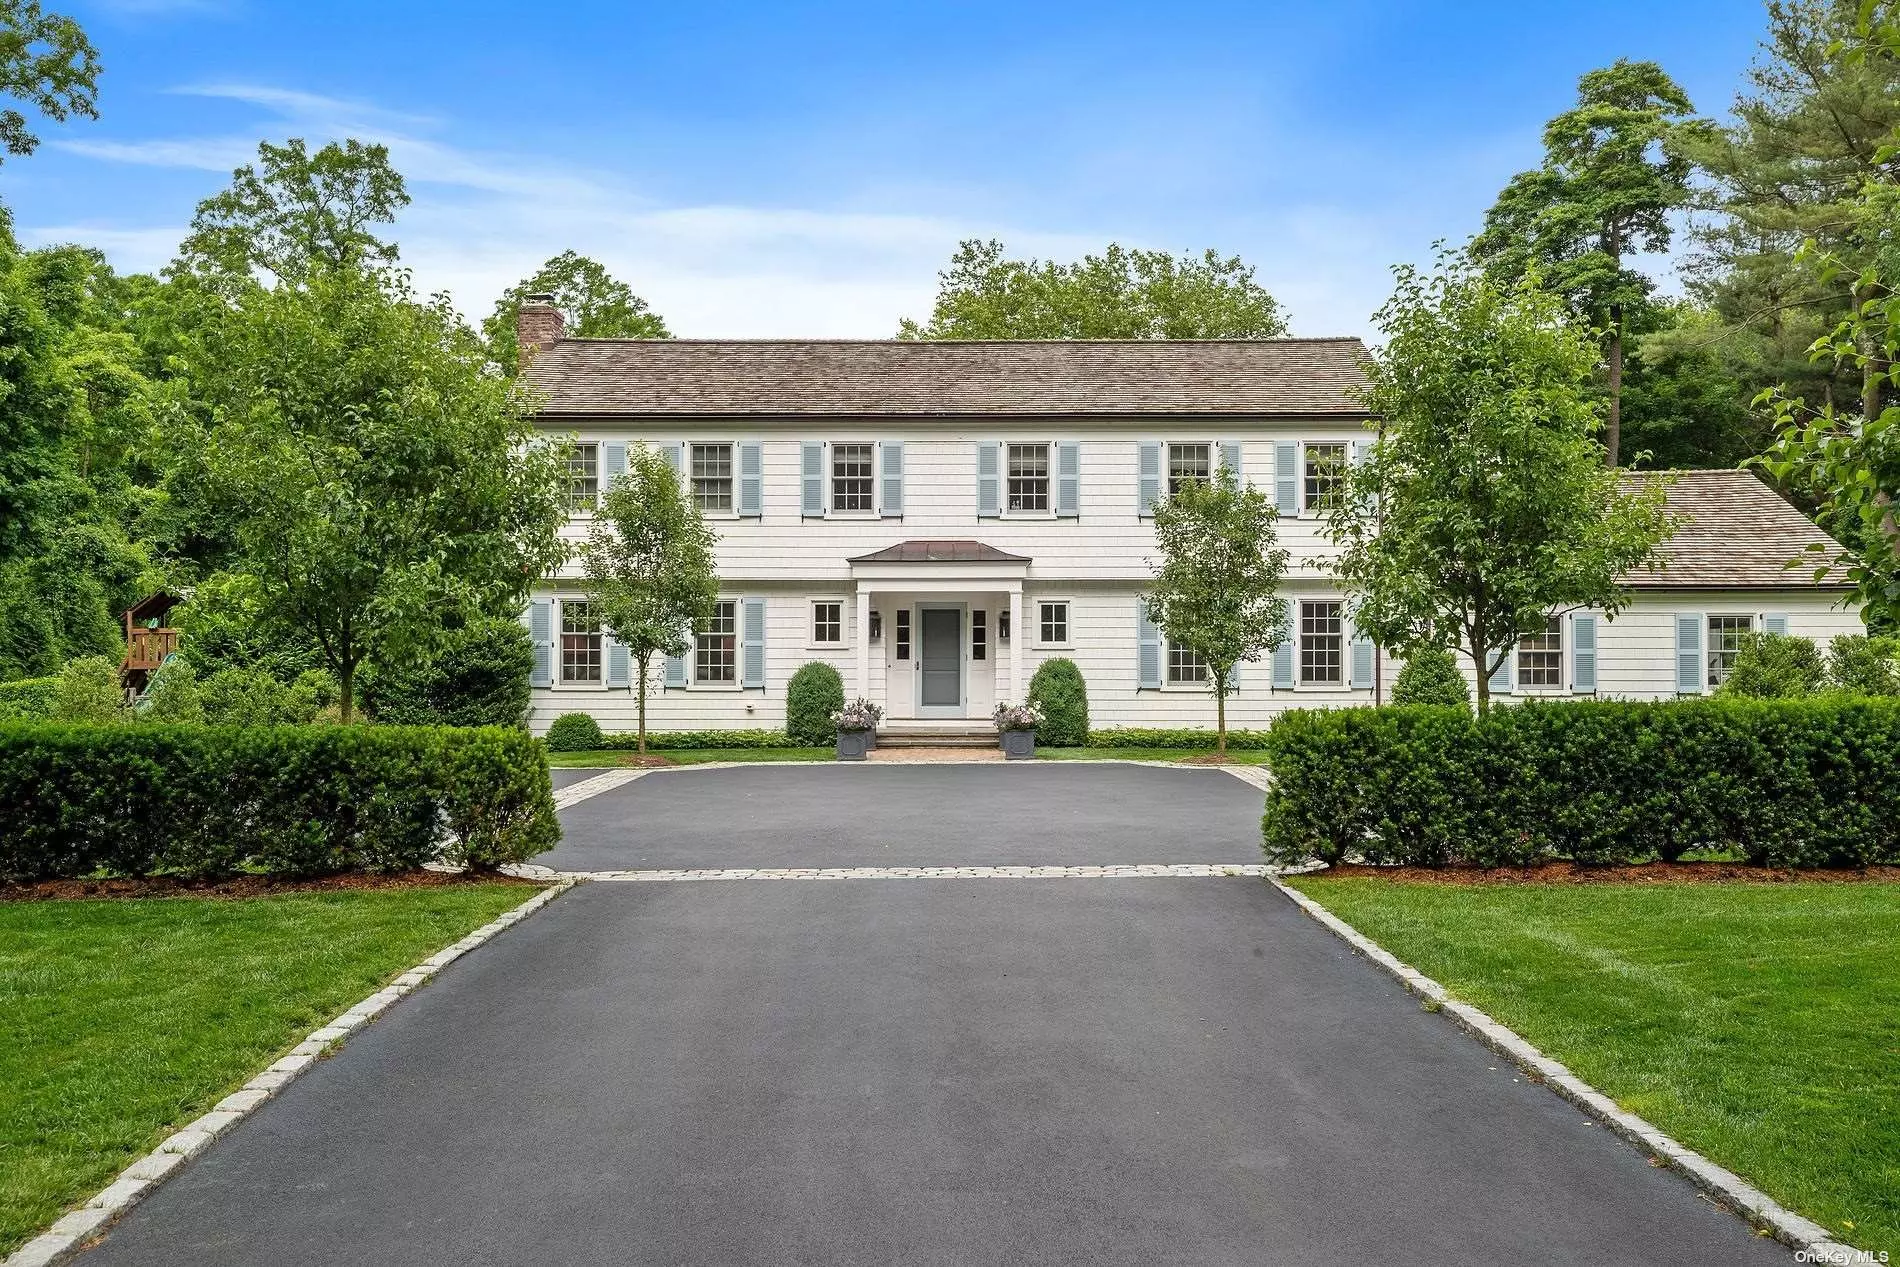 A courtyard welcomes you to an exceptionally renovated in 2017 custom built Colonial in the Village of Lattingtown. 4 Bedrooms and 4.5 Bathrooms set on 2 flat acres with mature plantings and incredible brand new gunite salt water pool . Chef&rsquo;s Eat In Kitchen with top of the line appliances and marble countertops opens to gracious Family Room with custom built-ins. Charming Living room with wood burning fireplace, powder room, elegant dining room and inviting sunroom with second Wood burning fireplace. French doors open to blue stone terrace with outdoor kitchen which is an entertainer&rsquo;s dream. Sophisticated Primary Suite with oversize walk in closet and ensuite bathroom. Three additional spacious bedrooms and 2 full baths complete the Second floor. All bathrooms have radiant heat and custom vanities. Finished Basement with playroom and gym. Gas heating, whole house water filtration system and generator. Close To Town, Parks, Train Station & schools.